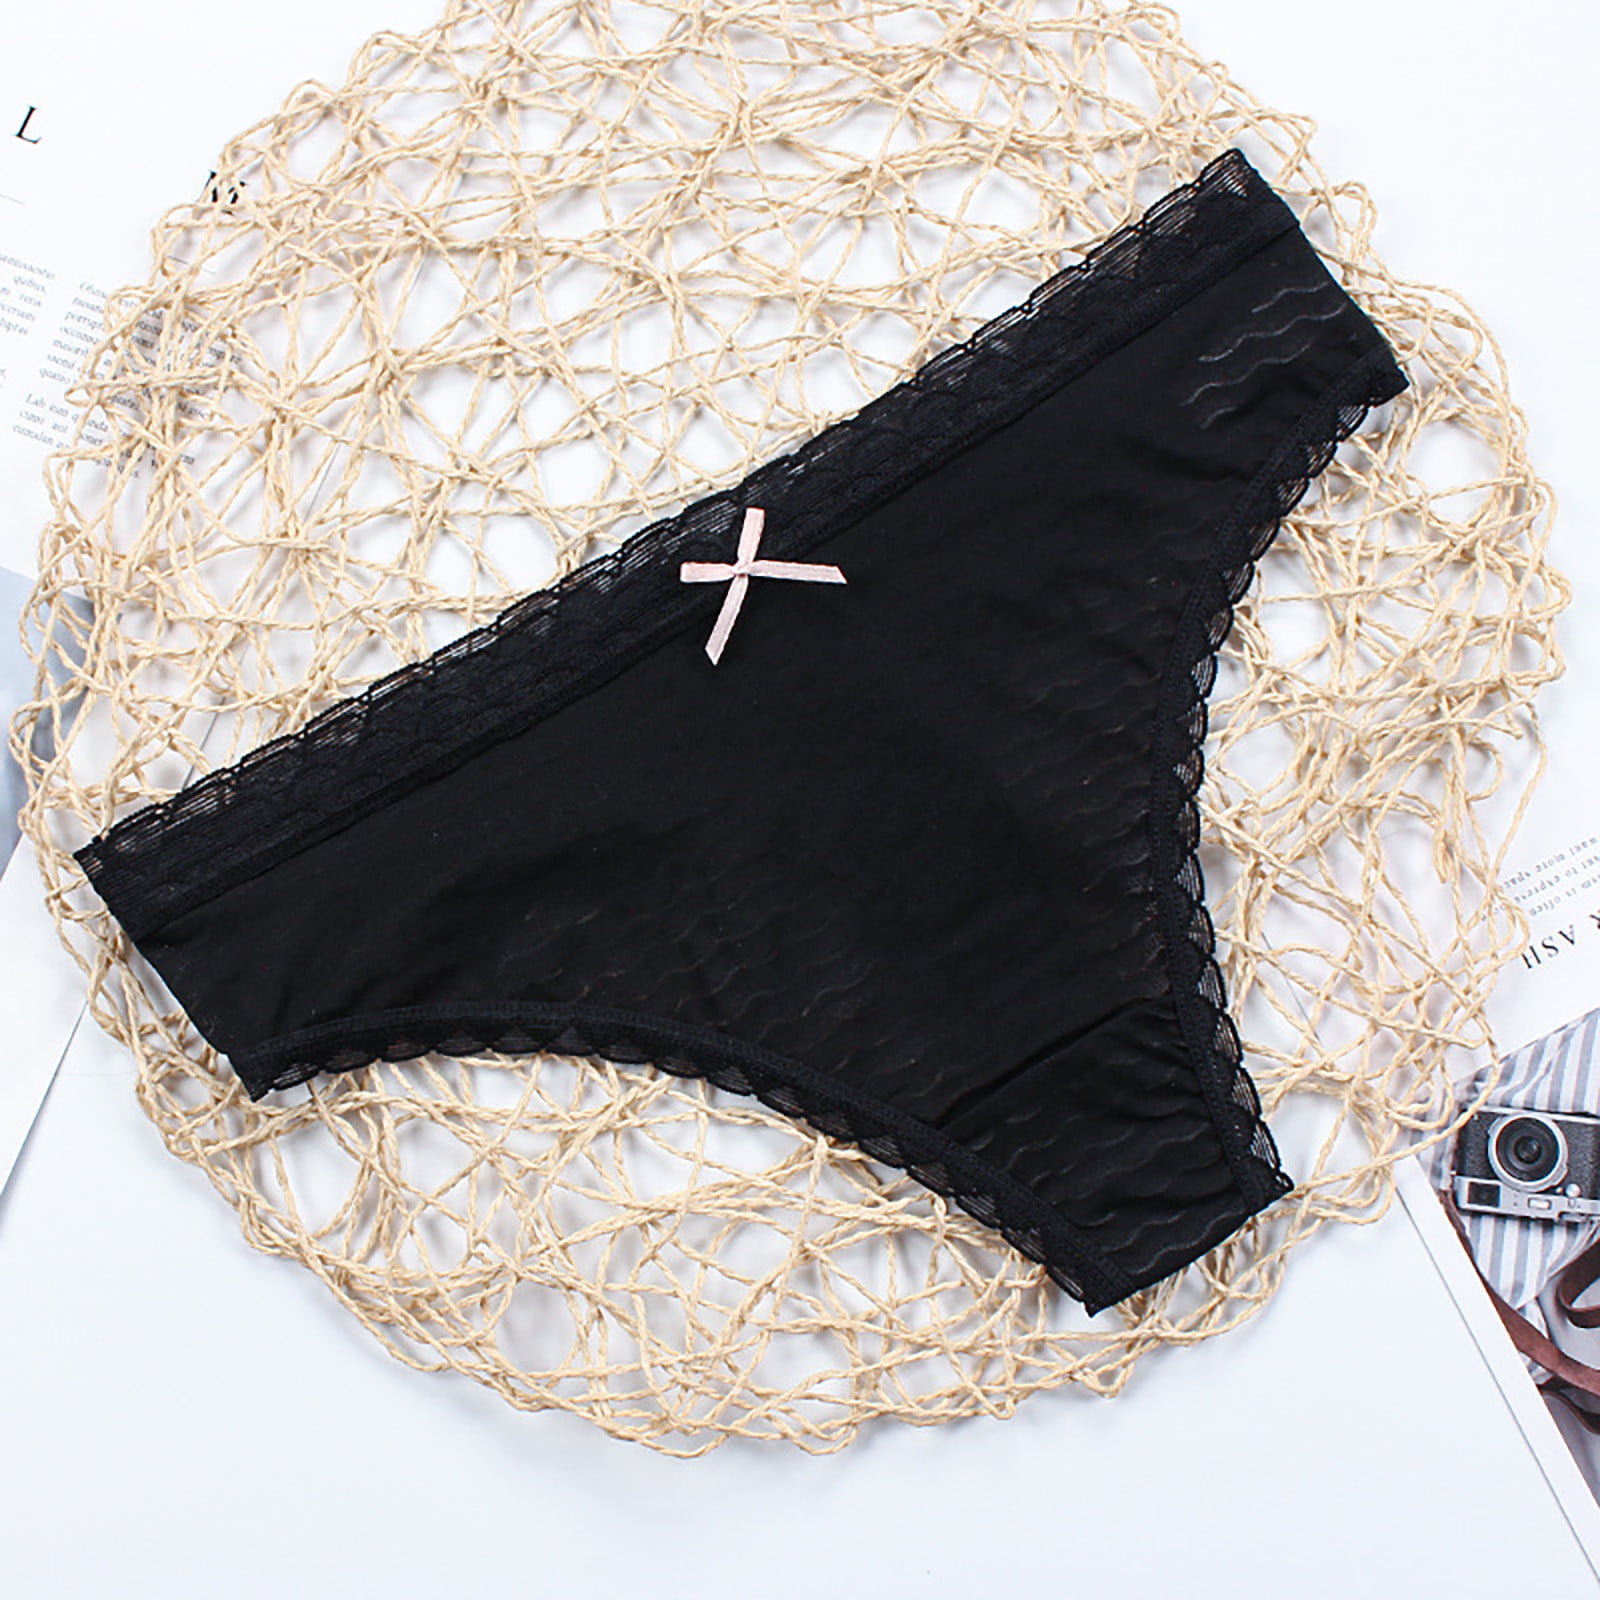 MRULIC intimates for women Transparent Cotton Hollow Pants Women's  Underwear Thong Waist Solid Fun Low Out Black + XL 